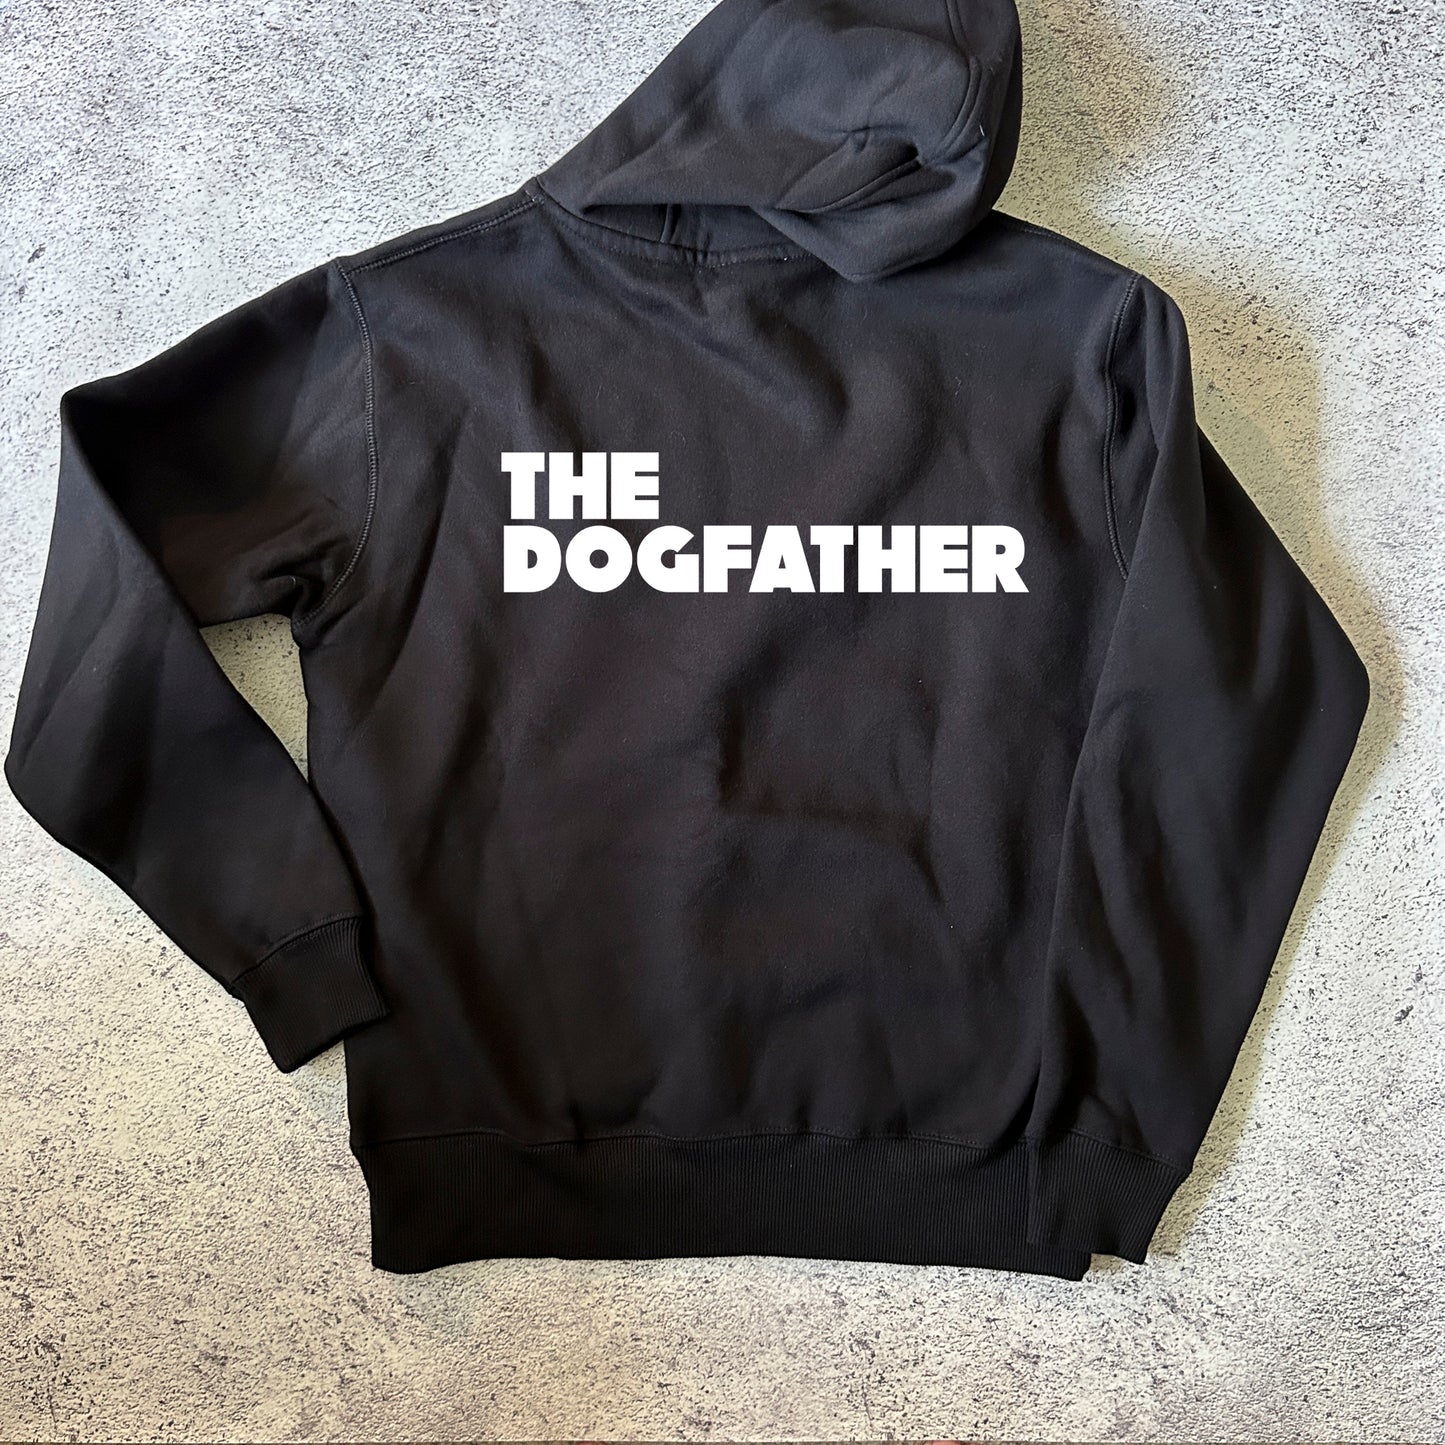 The Dogfather Zip Hoodie